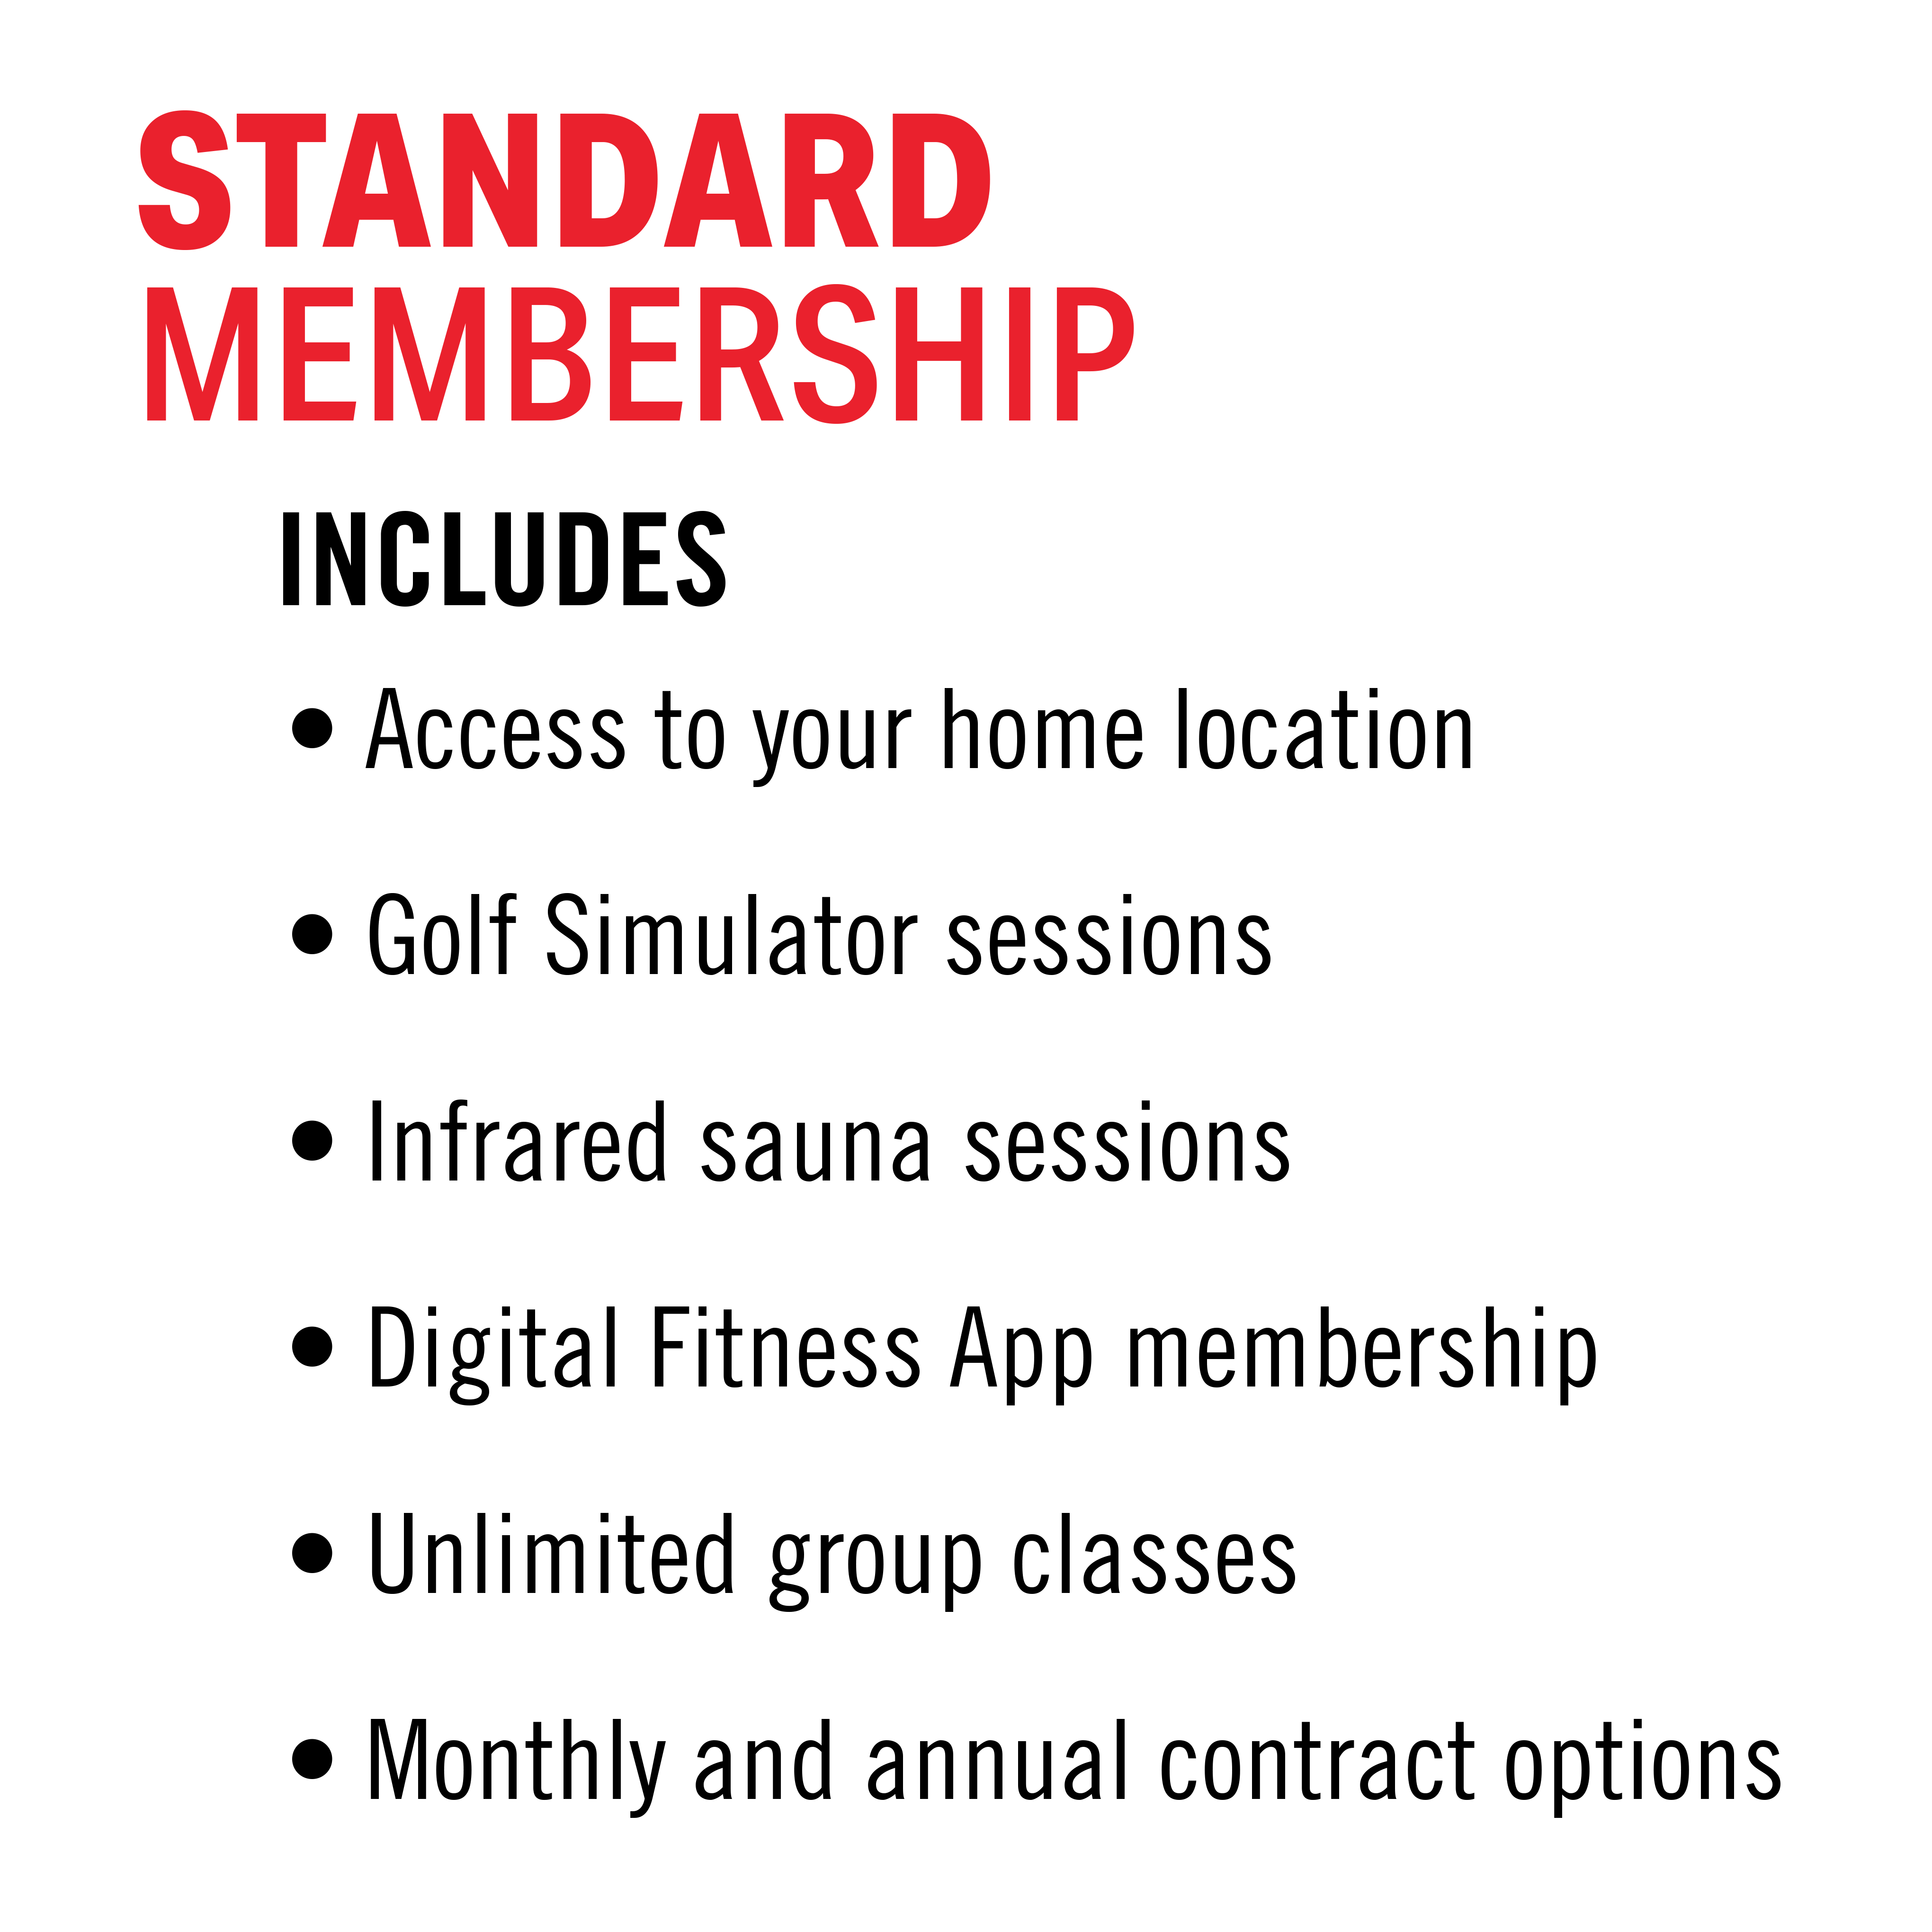 Standard Membership includes Access to your home location, Golf Simulator sessions, Infrared sauna sessions, Digital Fitness app membership, Unlimited group classes, Monthly and annual contract options